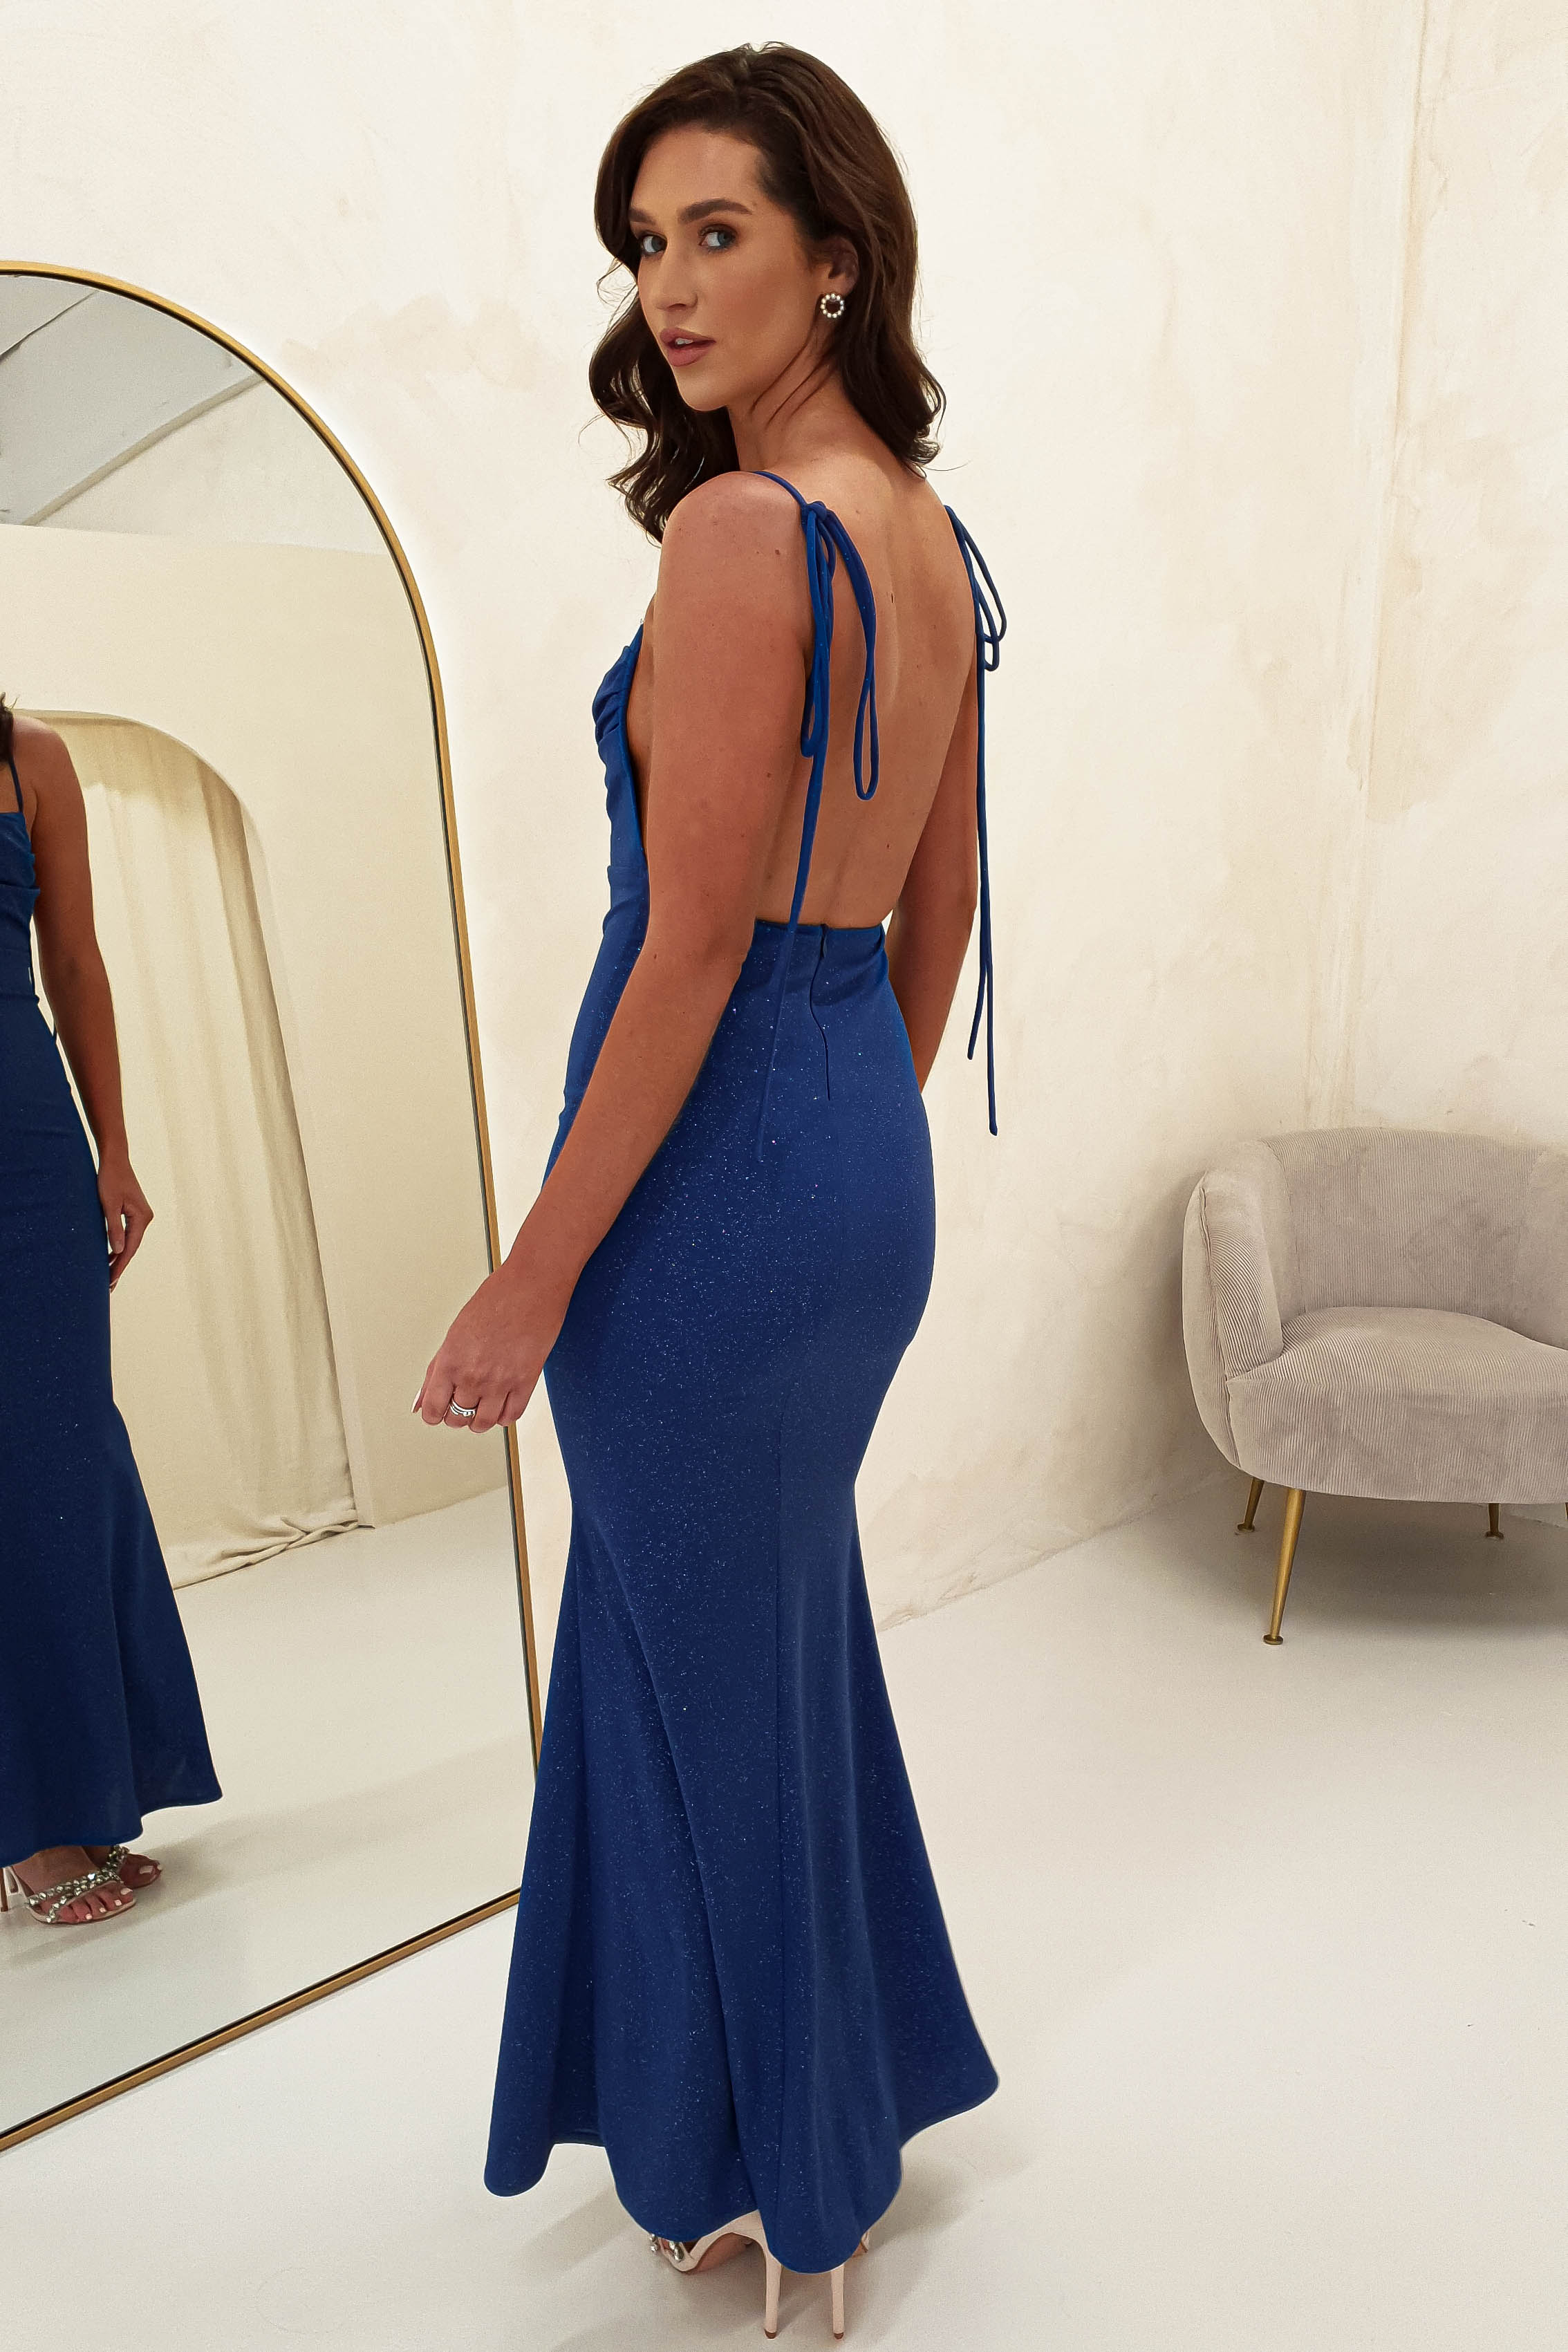 done-royal-blue-gown-with-cowl-neck-and-open-back-similar-to-saraid-royal-blue-sample-dresses-49336776982869.jpg